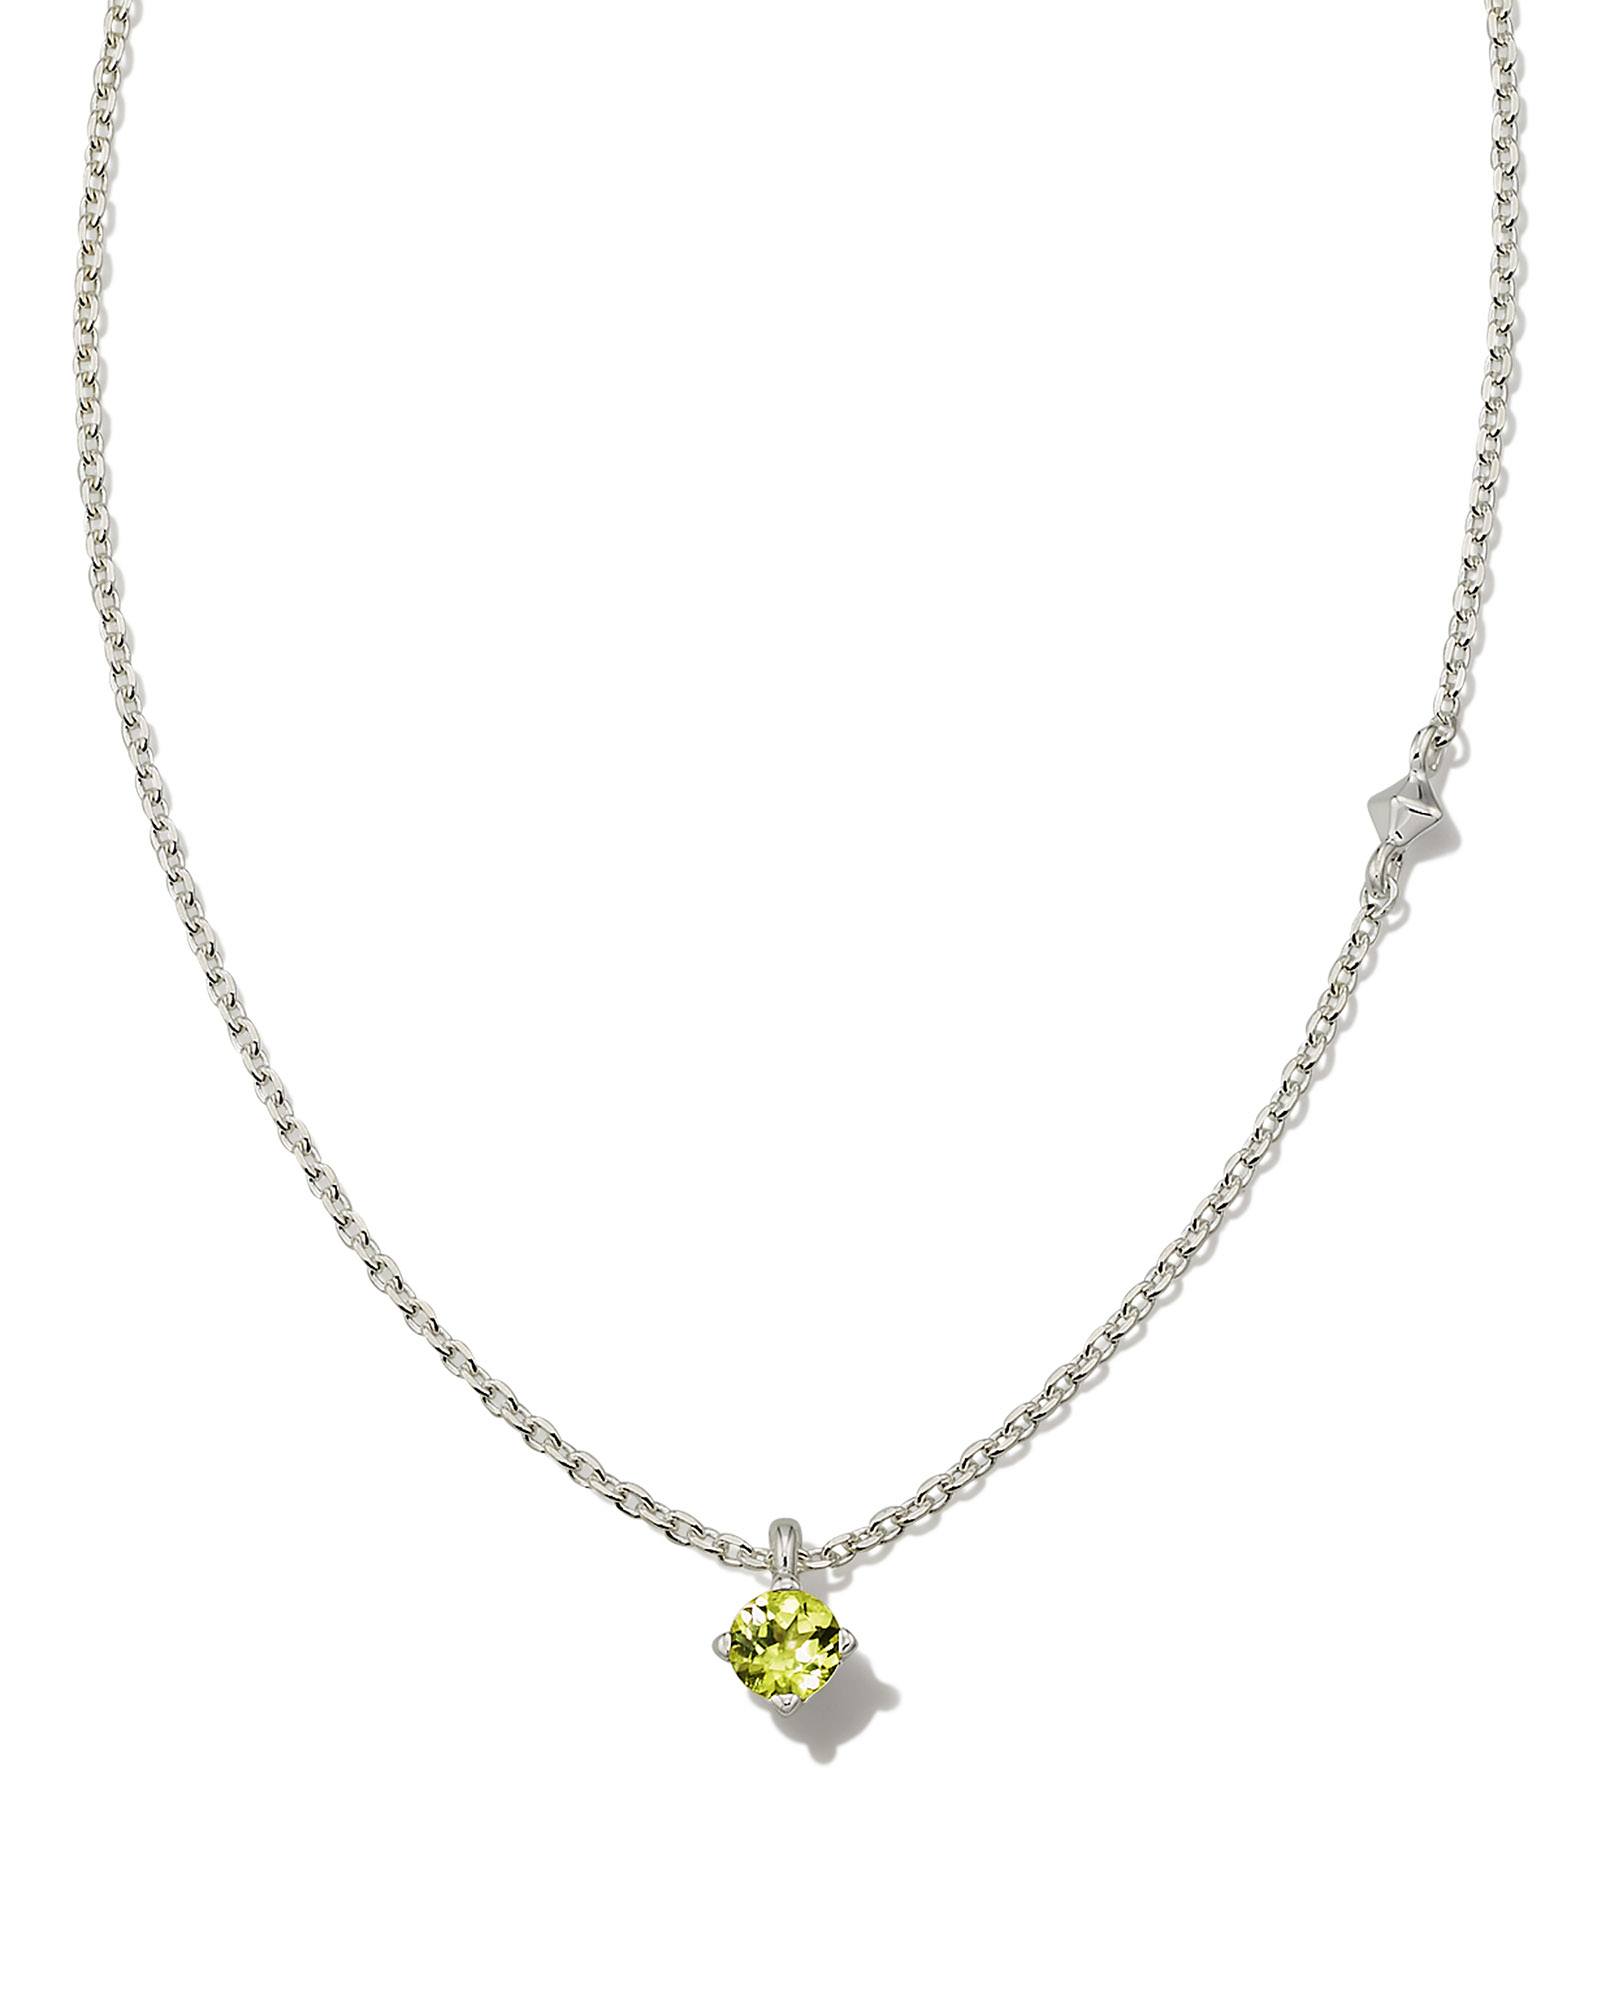 Maisie Sterling Silver Pendant Necklace in Peridot